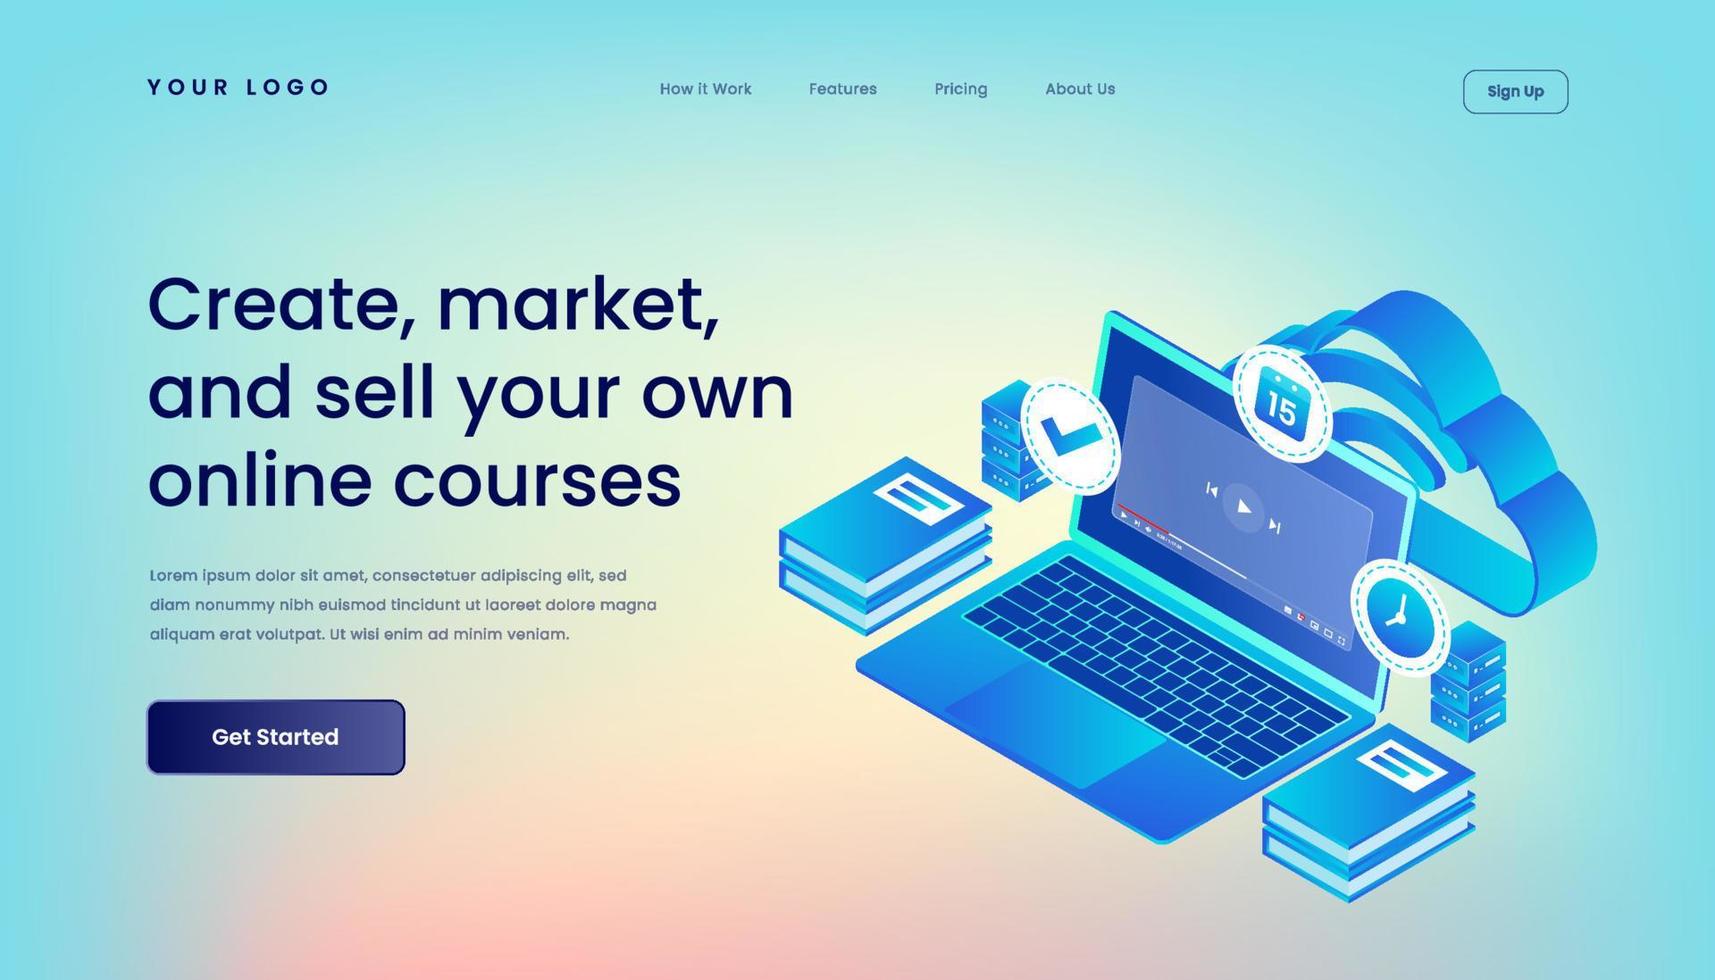 Create, market, and sell your own online courses Landing Page Template with Gradient Background and Isometric 3d Vector Illustration Desktop Web User Interface